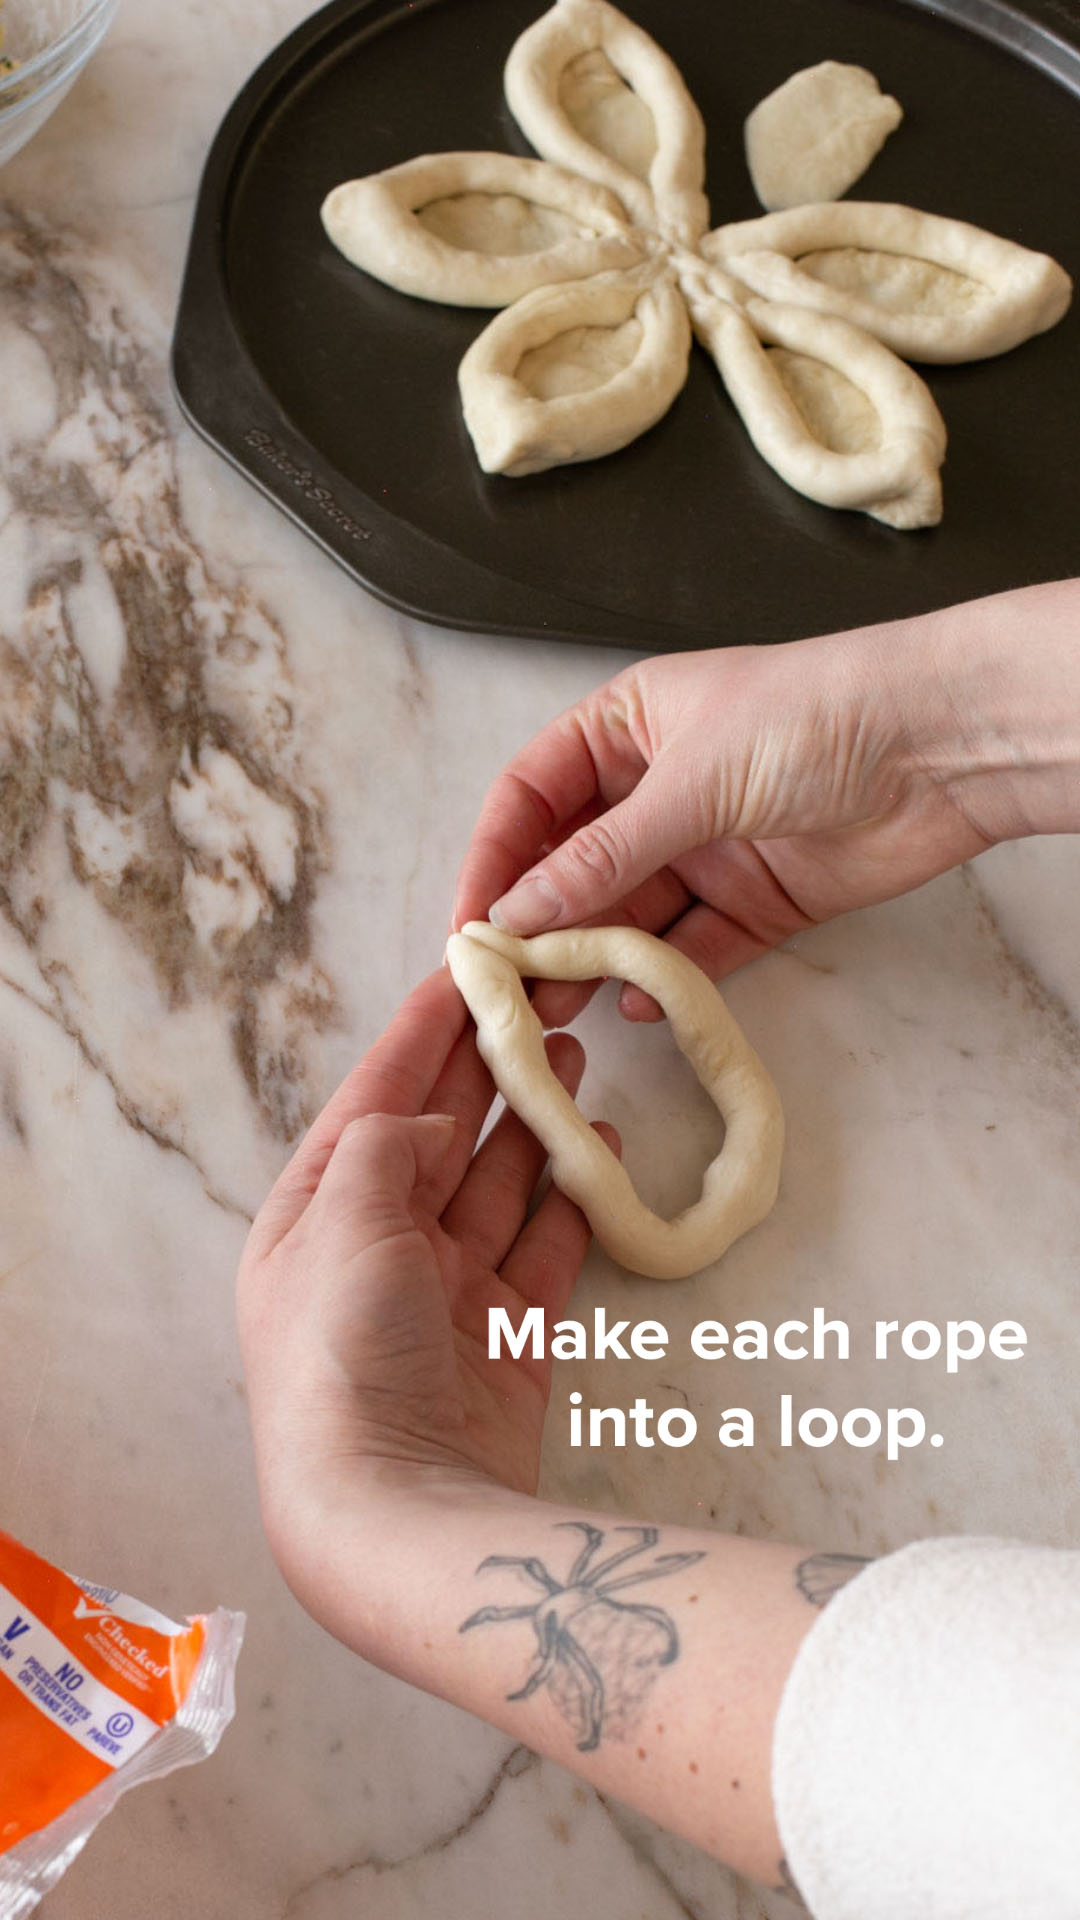 Make each roll into a loop.